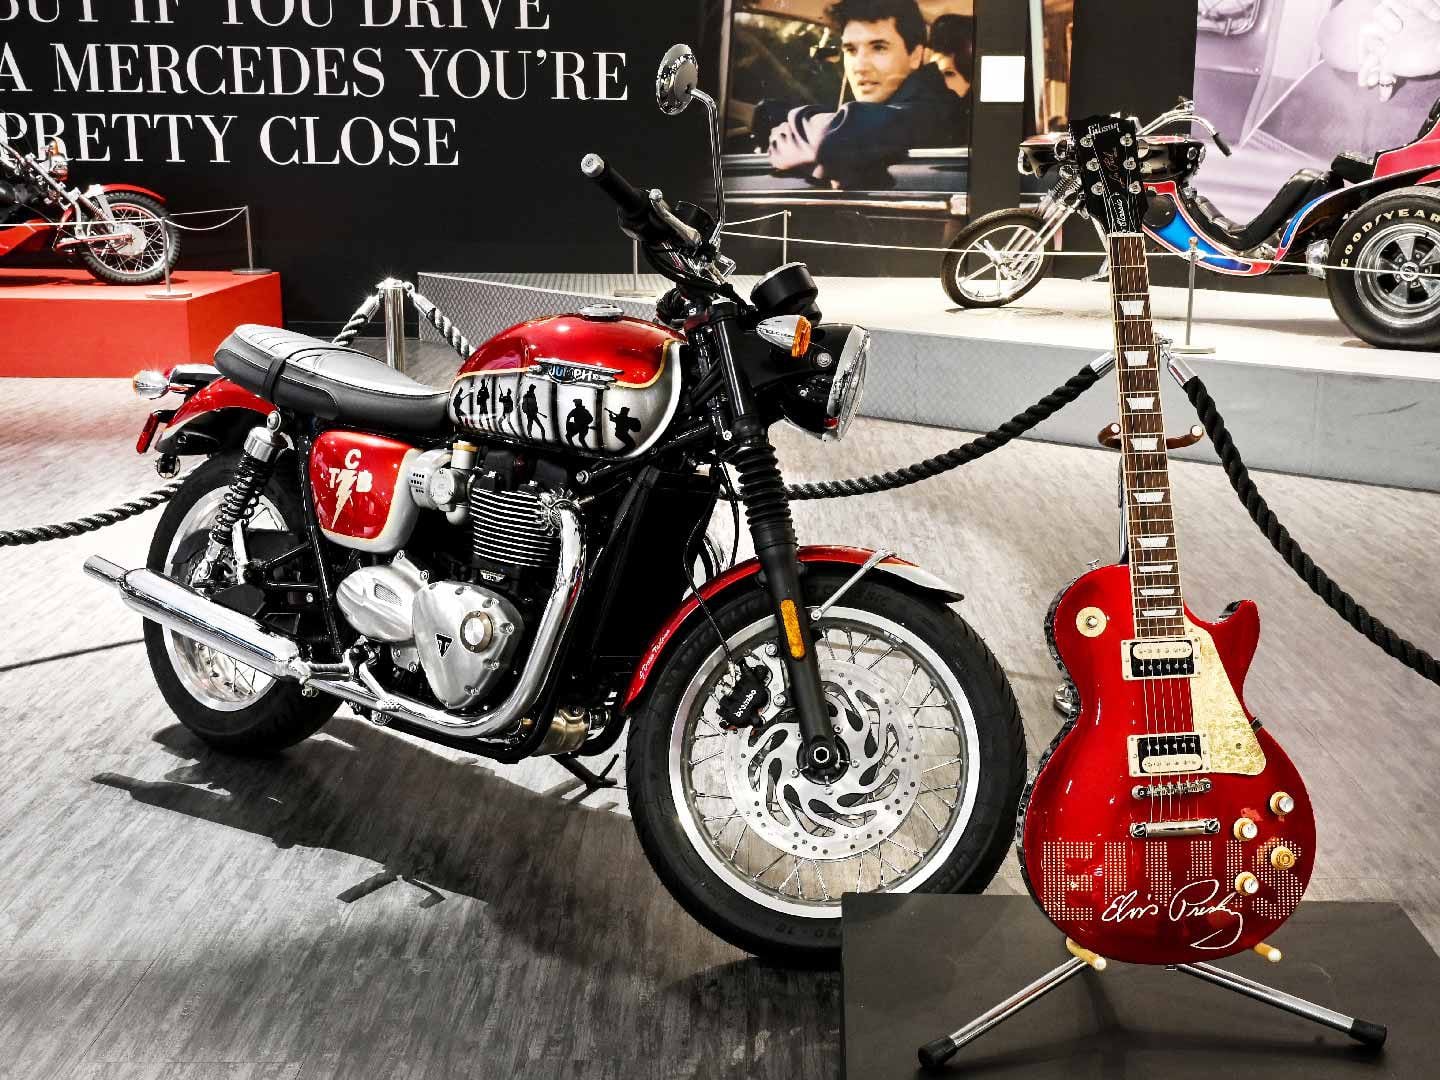 Sold! A Unique Presley Triumph Motorcycle and Gibson Les Paul Guitar Raise Thousands for Charity